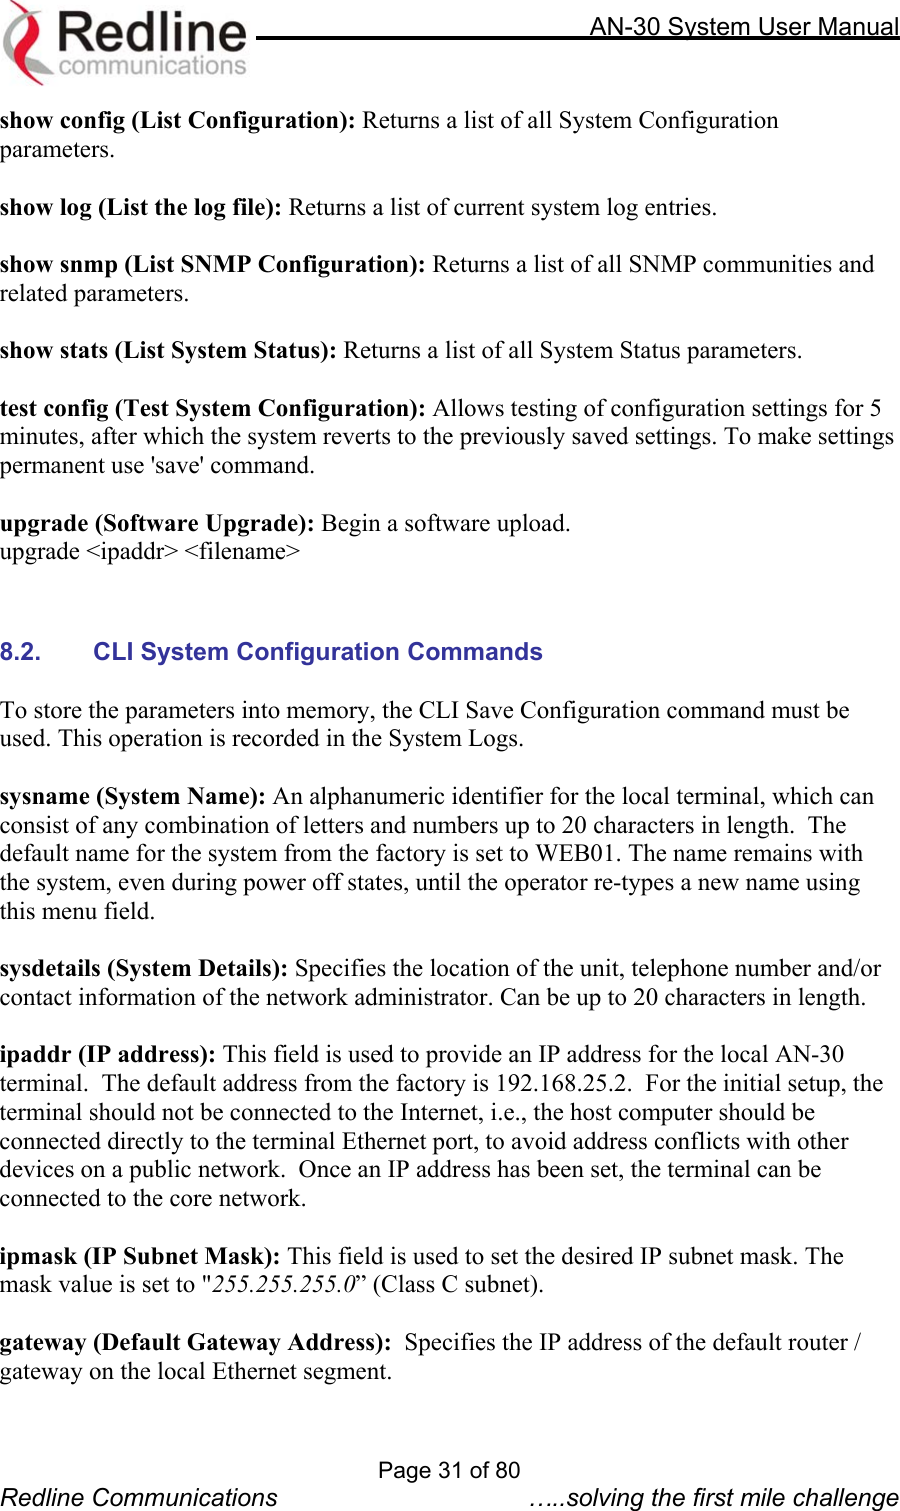     AN-30 System User Manual  show config (List Configuration): Returns a list of all System Configuration parameters.  show log (List the log file): Returns a list of current system log entries.  show snmp (List SNMP Configuration): Returns a list of all SNMP communities and  related parameters.  show stats (List System Status): Returns a list of all System Status parameters.  test config (Test System Configuration): Allows testing of configuration settings for 5 minutes, after which the system reverts to the previously saved settings. To make settings permanent use &apos;save&apos; command.  upgrade (Software Upgrade): Begin a software upload. upgrade &lt;ipaddr&gt; &lt;filename&gt;    8.2.  CLI System Configuration Commands  To store the parameters into memory, the CLI Save Configuration command must be used. This operation is recorded in the System Logs.    sysname (System Name): An alphanumeric identifier for the local terminal, which can consist of any combination of letters and numbers up to 20 characters in length.  The default name for the system from the factory is set to WEB01. The name remains with the system, even during power off states, until the operator re-types a new name using this menu field.  sysdetails (System Details): Specifies the location of the unit, telephone number and/or contact information of the network administrator. Can be up to 20 characters in length.   ipaddr (IP address): This field is used to provide an IP address for the local AN-30 terminal.  The default address from the factory is 192.168.25.2.  For the initial setup, the terminal should not be connected to the Internet, i.e., the host computer should be connected directly to the terminal Ethernet port, to avoid address conflicts with other devices on a public network.  Once an IP address has been set, the terminal can be connected to the core network.    ipmask (IP Subnet Mask): This field is used to set the desired IP subnet mask. The mask value is set to &quot;255.255.255.0” (Class C subnet).  gateway (Default Gateway Address):  Specifies the IP address of the default router / gateway on the local Ethernet segment.  Page 31 of 80 Redline Communications  …..solving the first mile challenge 